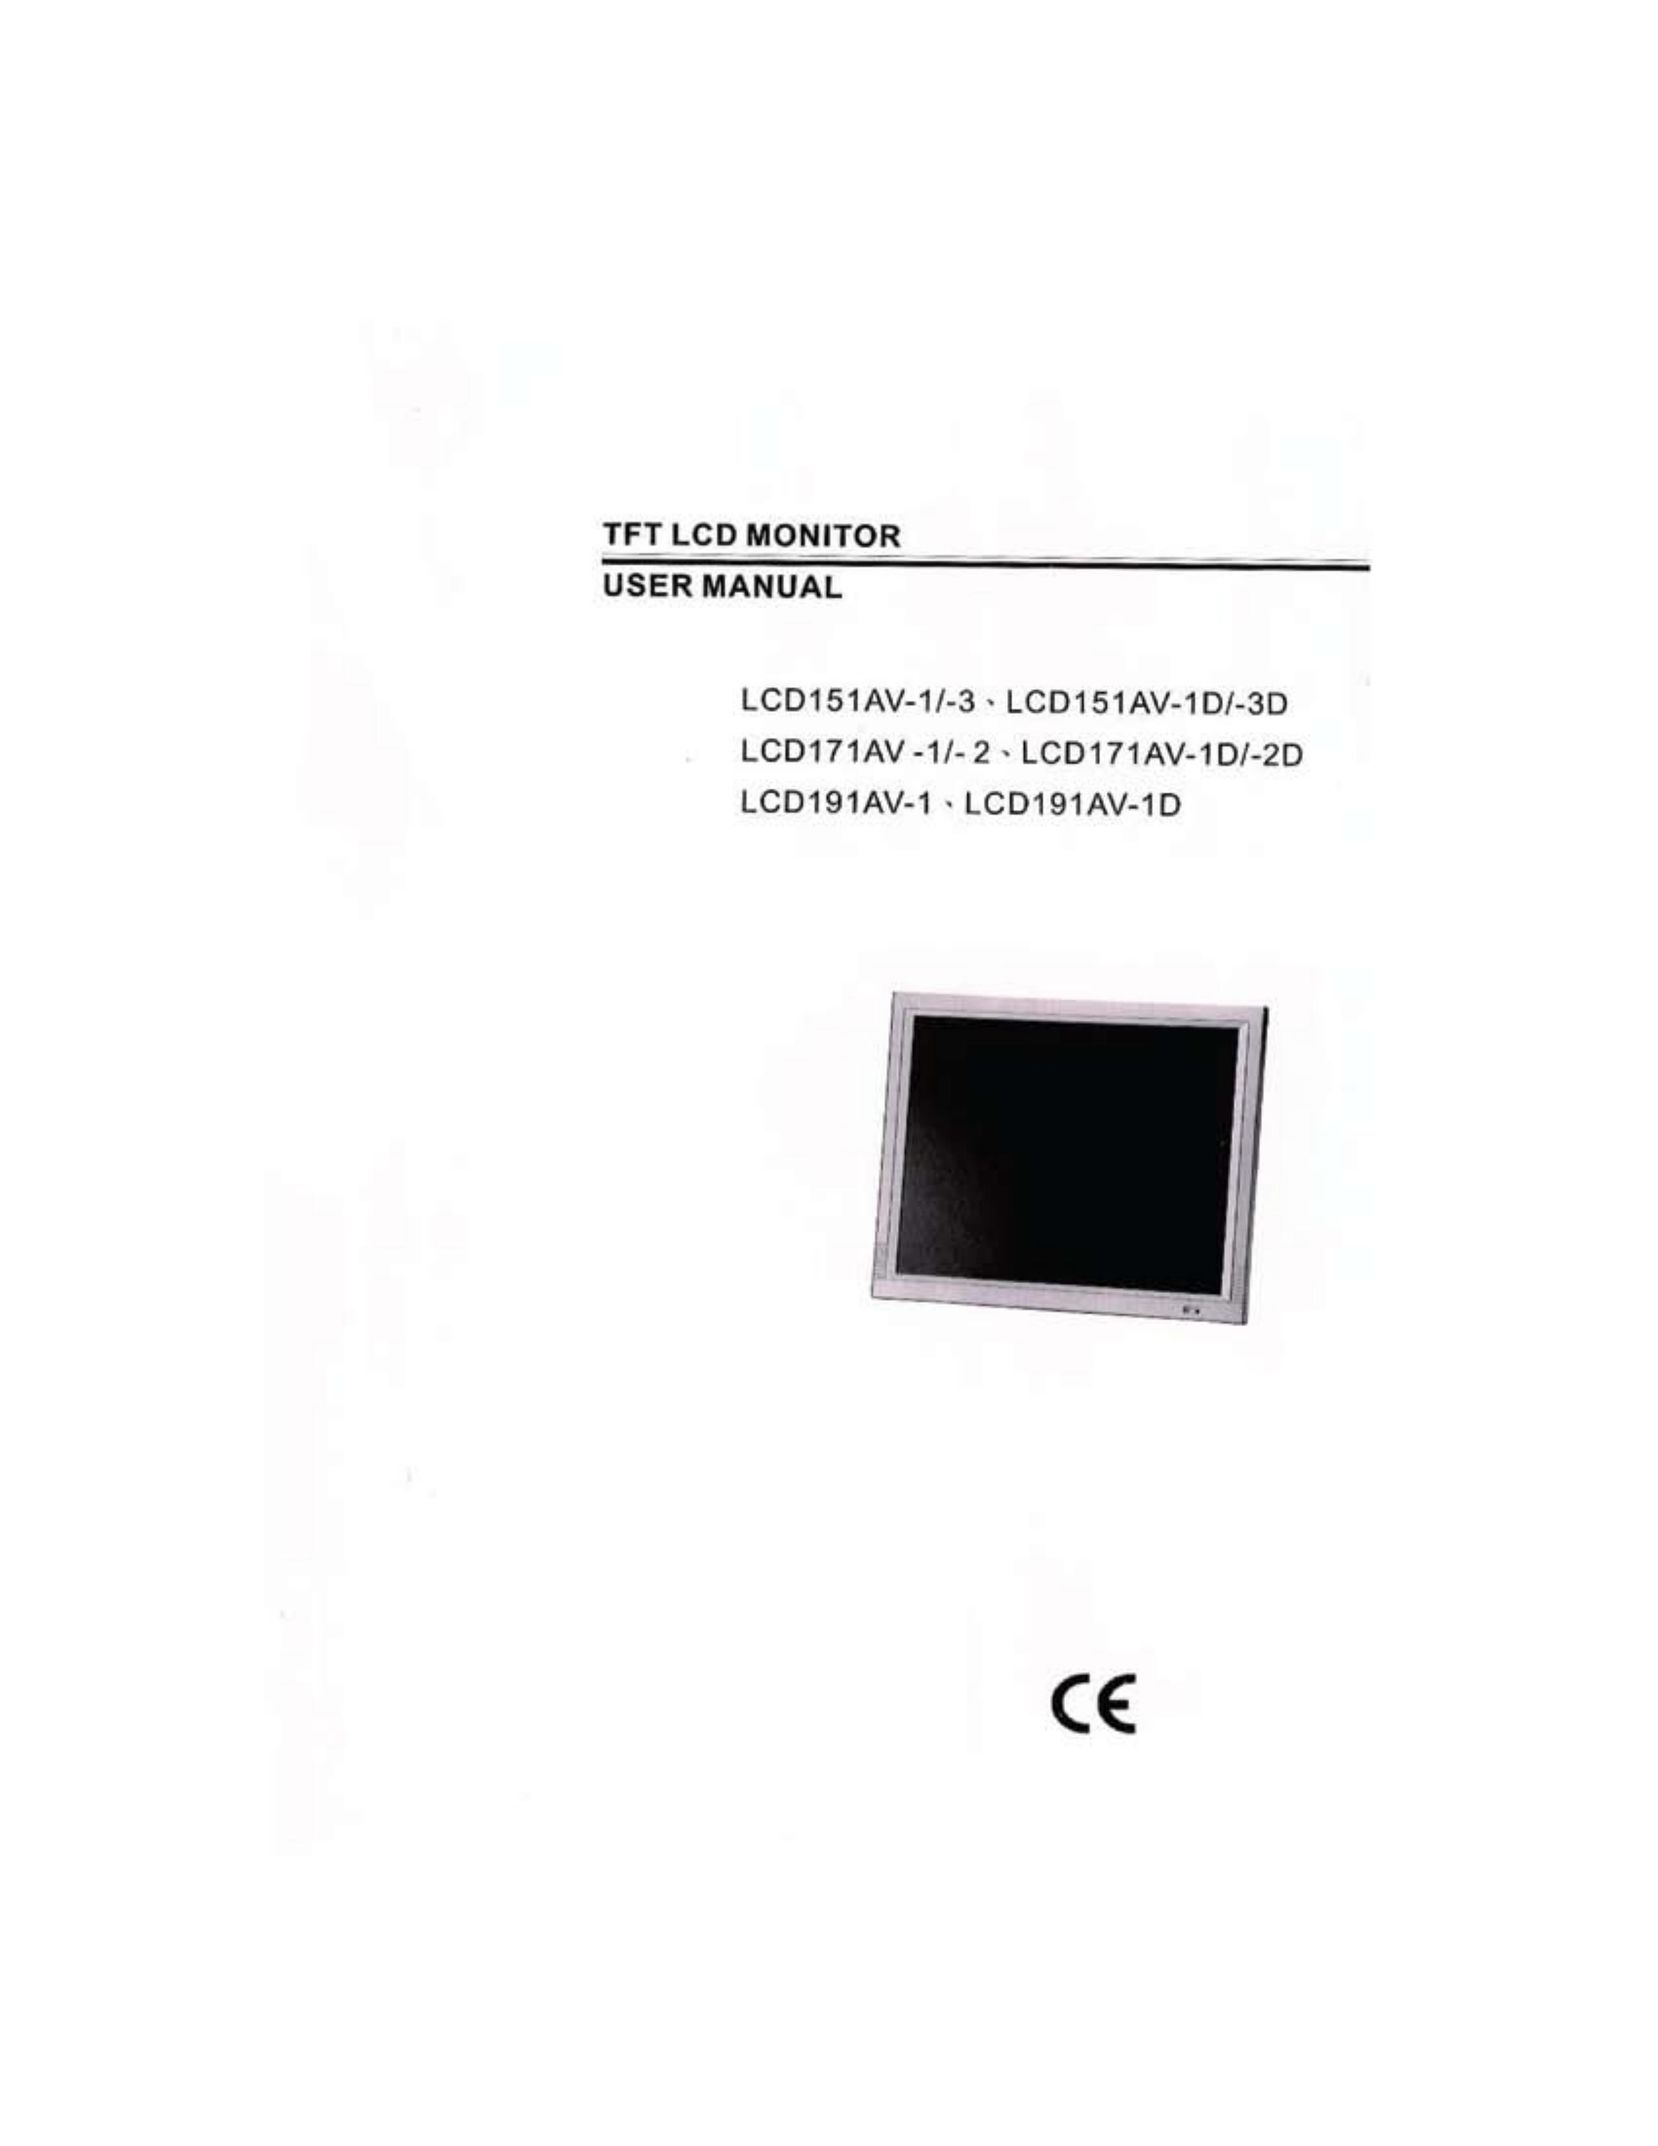 AVE LCD151AV-1D/-3D Computer Monitor User Manual (Page 1)